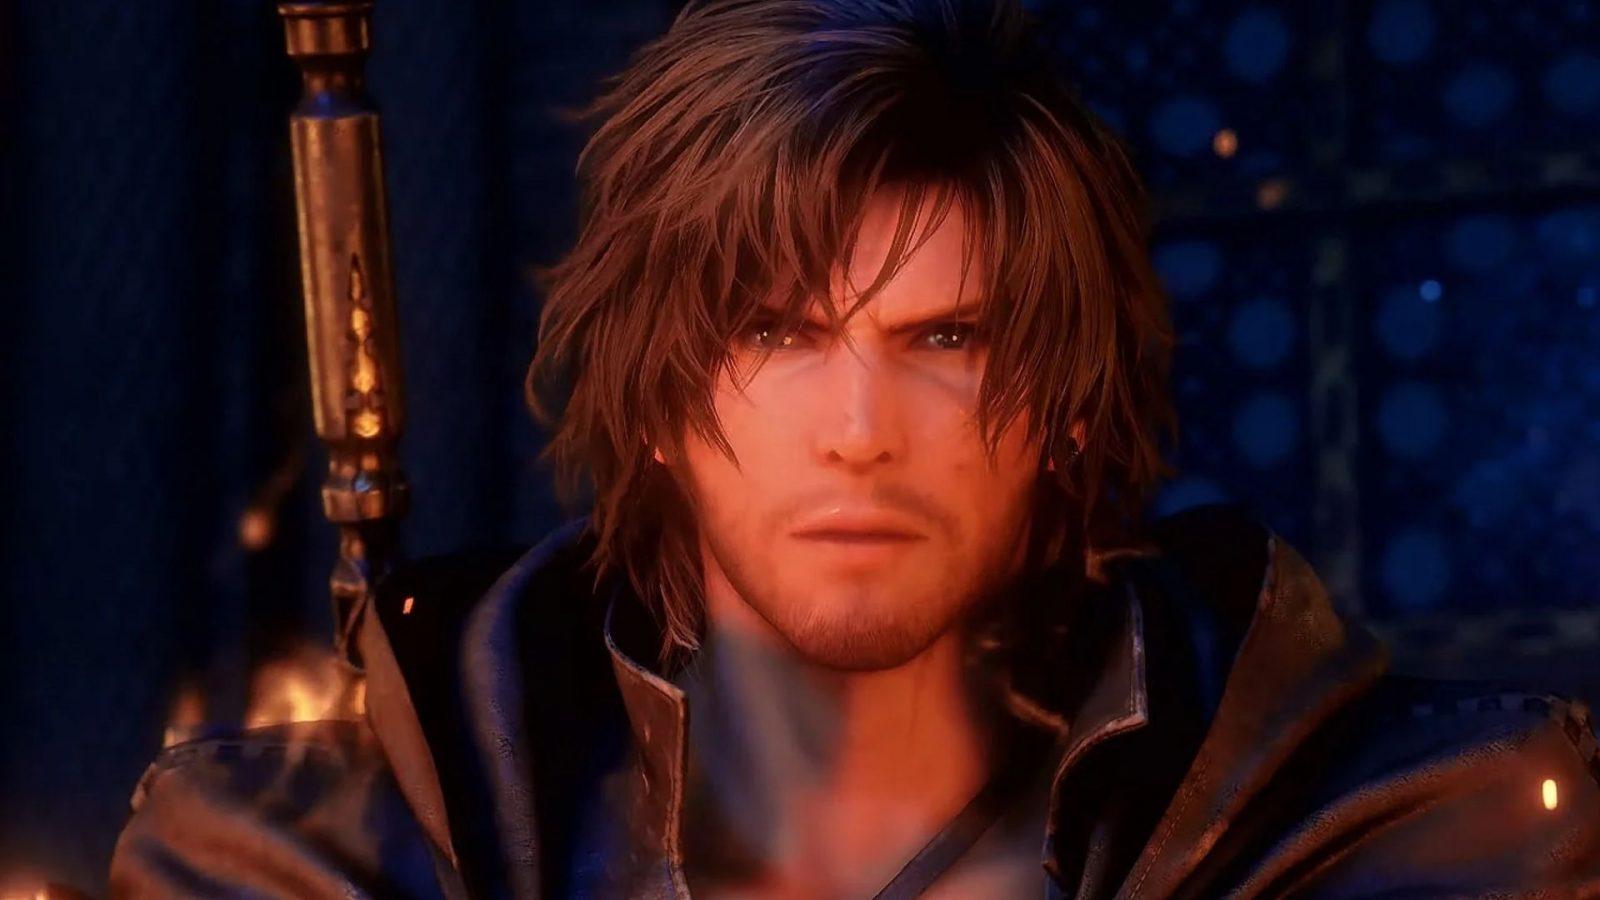 Final Fantasy 16 in a review-bomb tug-of-war as players fight to raise  Metacritic score - Dexerto